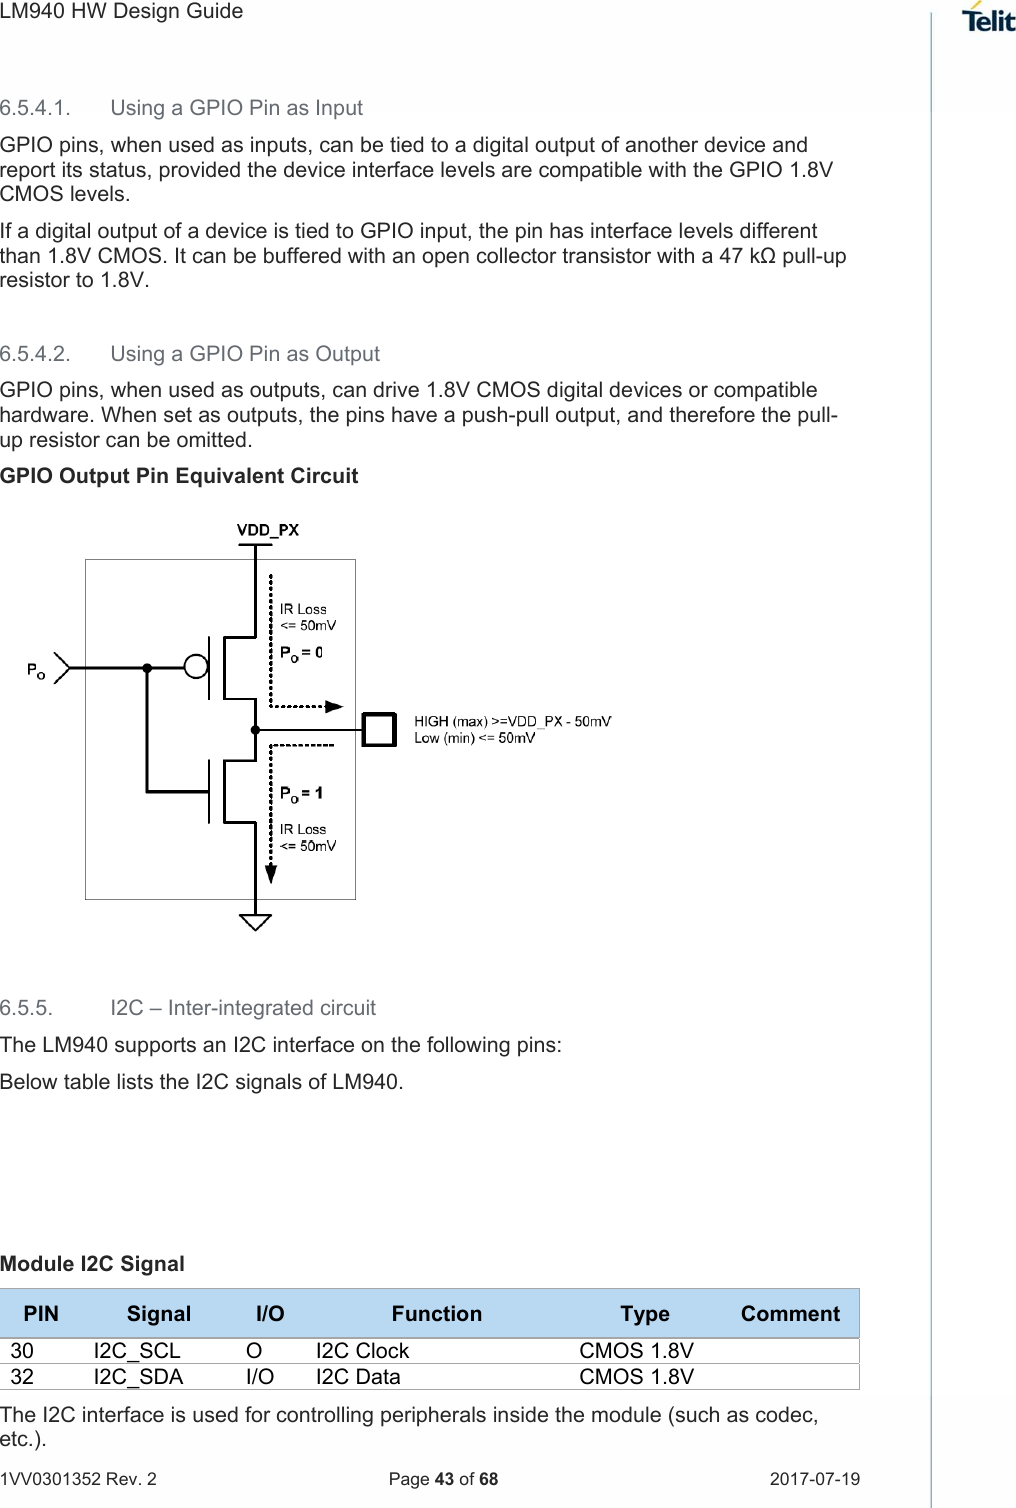 LM940 HW Design Guide   1VV0301352 Rev. 2   Page 43 of 68  2017-07-19  6.5.4.1.  Using a GPIO Pin as Input GPIO pins, when used as inputs, can be tied to a digital output of another device and report its status, provided the device interface levels are compatible with the GPIO 1.8V CMOS levels.  If a digital output of a device is tied to GPIO input, the pin has interface levels different than 1.8V CMOS. It can be buffered with an open collector transistor with a 47 kΩ pull-up resistor to 1.8V.  6.5.4.2.  Using a GPIO Pin as Output GPIO pins, when used as outputs, can drive 1.8V CMOS digital devices or compatible hardware. When set as outputs, the pins have a push-pull output, and therefore the pull-up resistor can be omitted. GPIO Output Pin Equivalent Circuit   6.5.5.  I2C – Inter-integrated circuit The LM940 supports an I2C interface on the following pins: Below table lists the I2C signals of LM940.     Module I2C Signal PIN  Signal  I/O  Function  Type  Comment 30  I2C_SCL  O  I2C Clock  CMOS 1.8V   32  I2C_SDA  I/O  I2C Data CMOS 1.8V  The I2C interface is used for controlling peripherals inside the module (such as codec, etc.). 